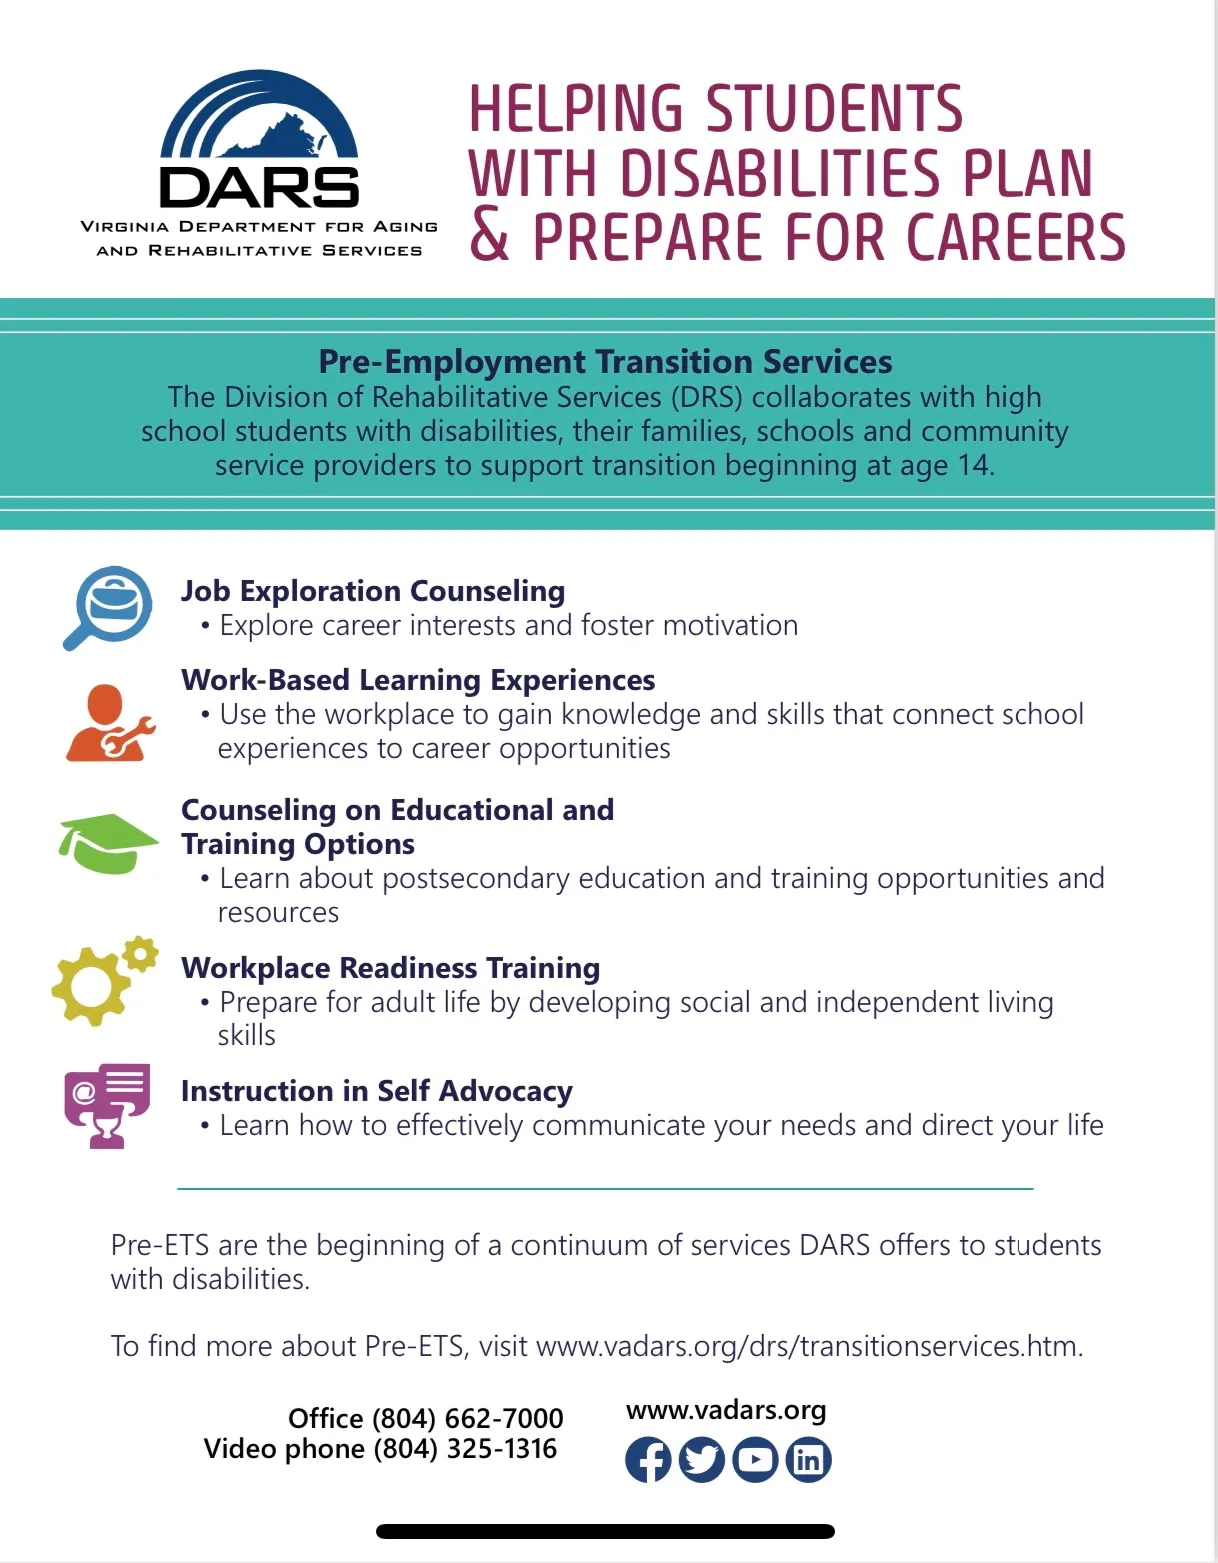 Helping Students with Disabilities Plan and Prepare for Careers